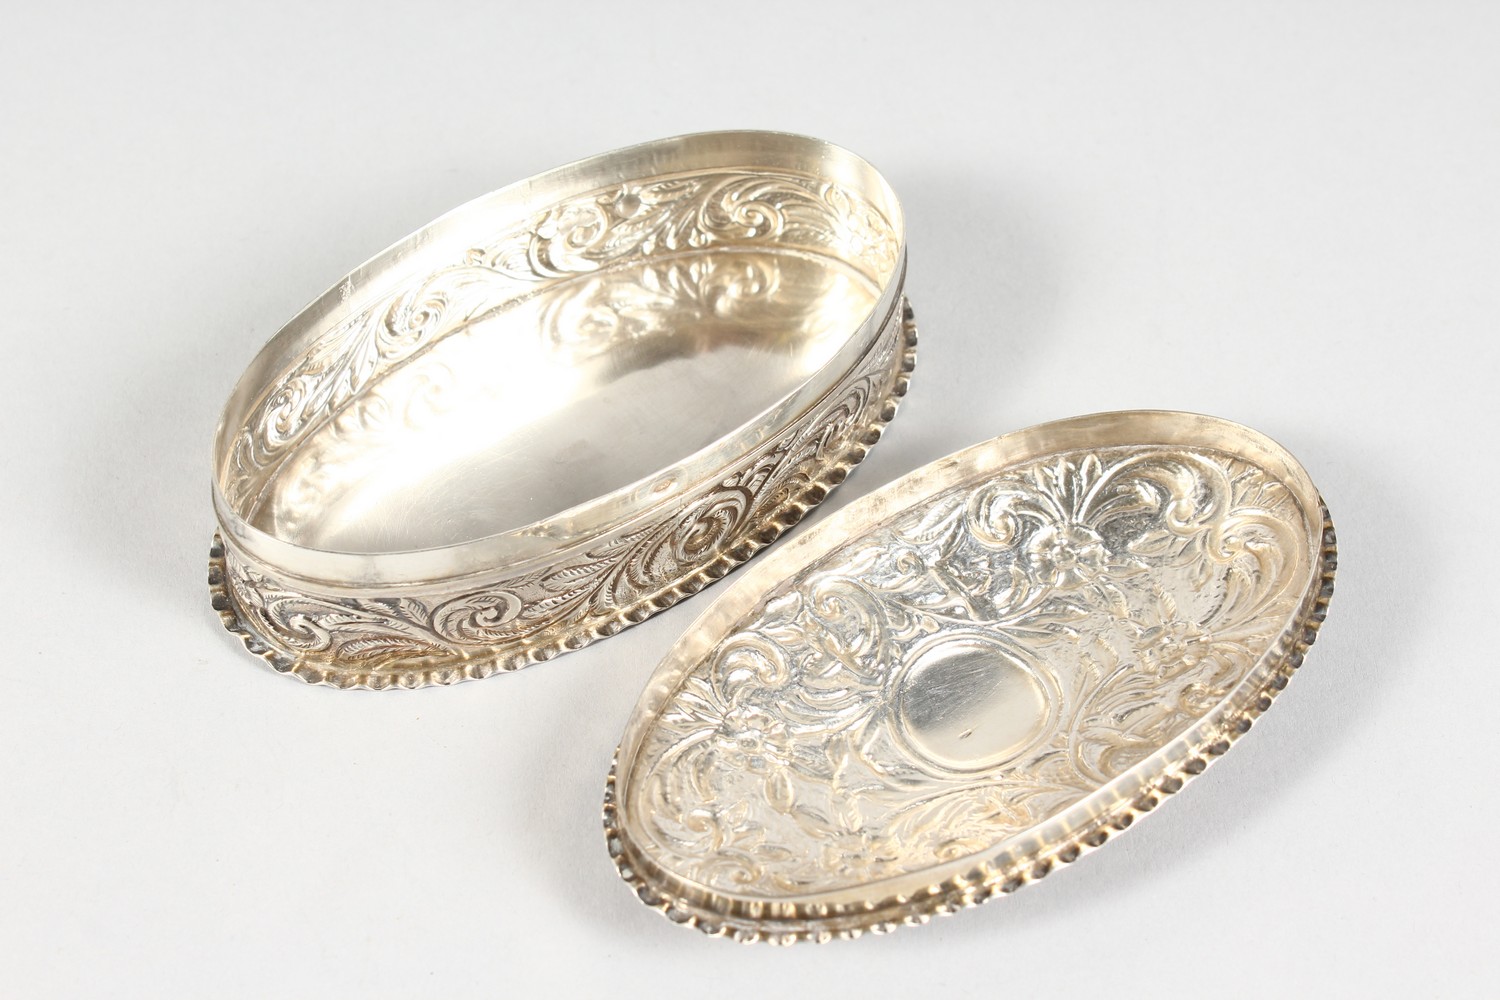 A VICTORIAN OVAL SILVER PIN BOX AND COVER, with repousse decoration. London 1890. - Image 7 of 9